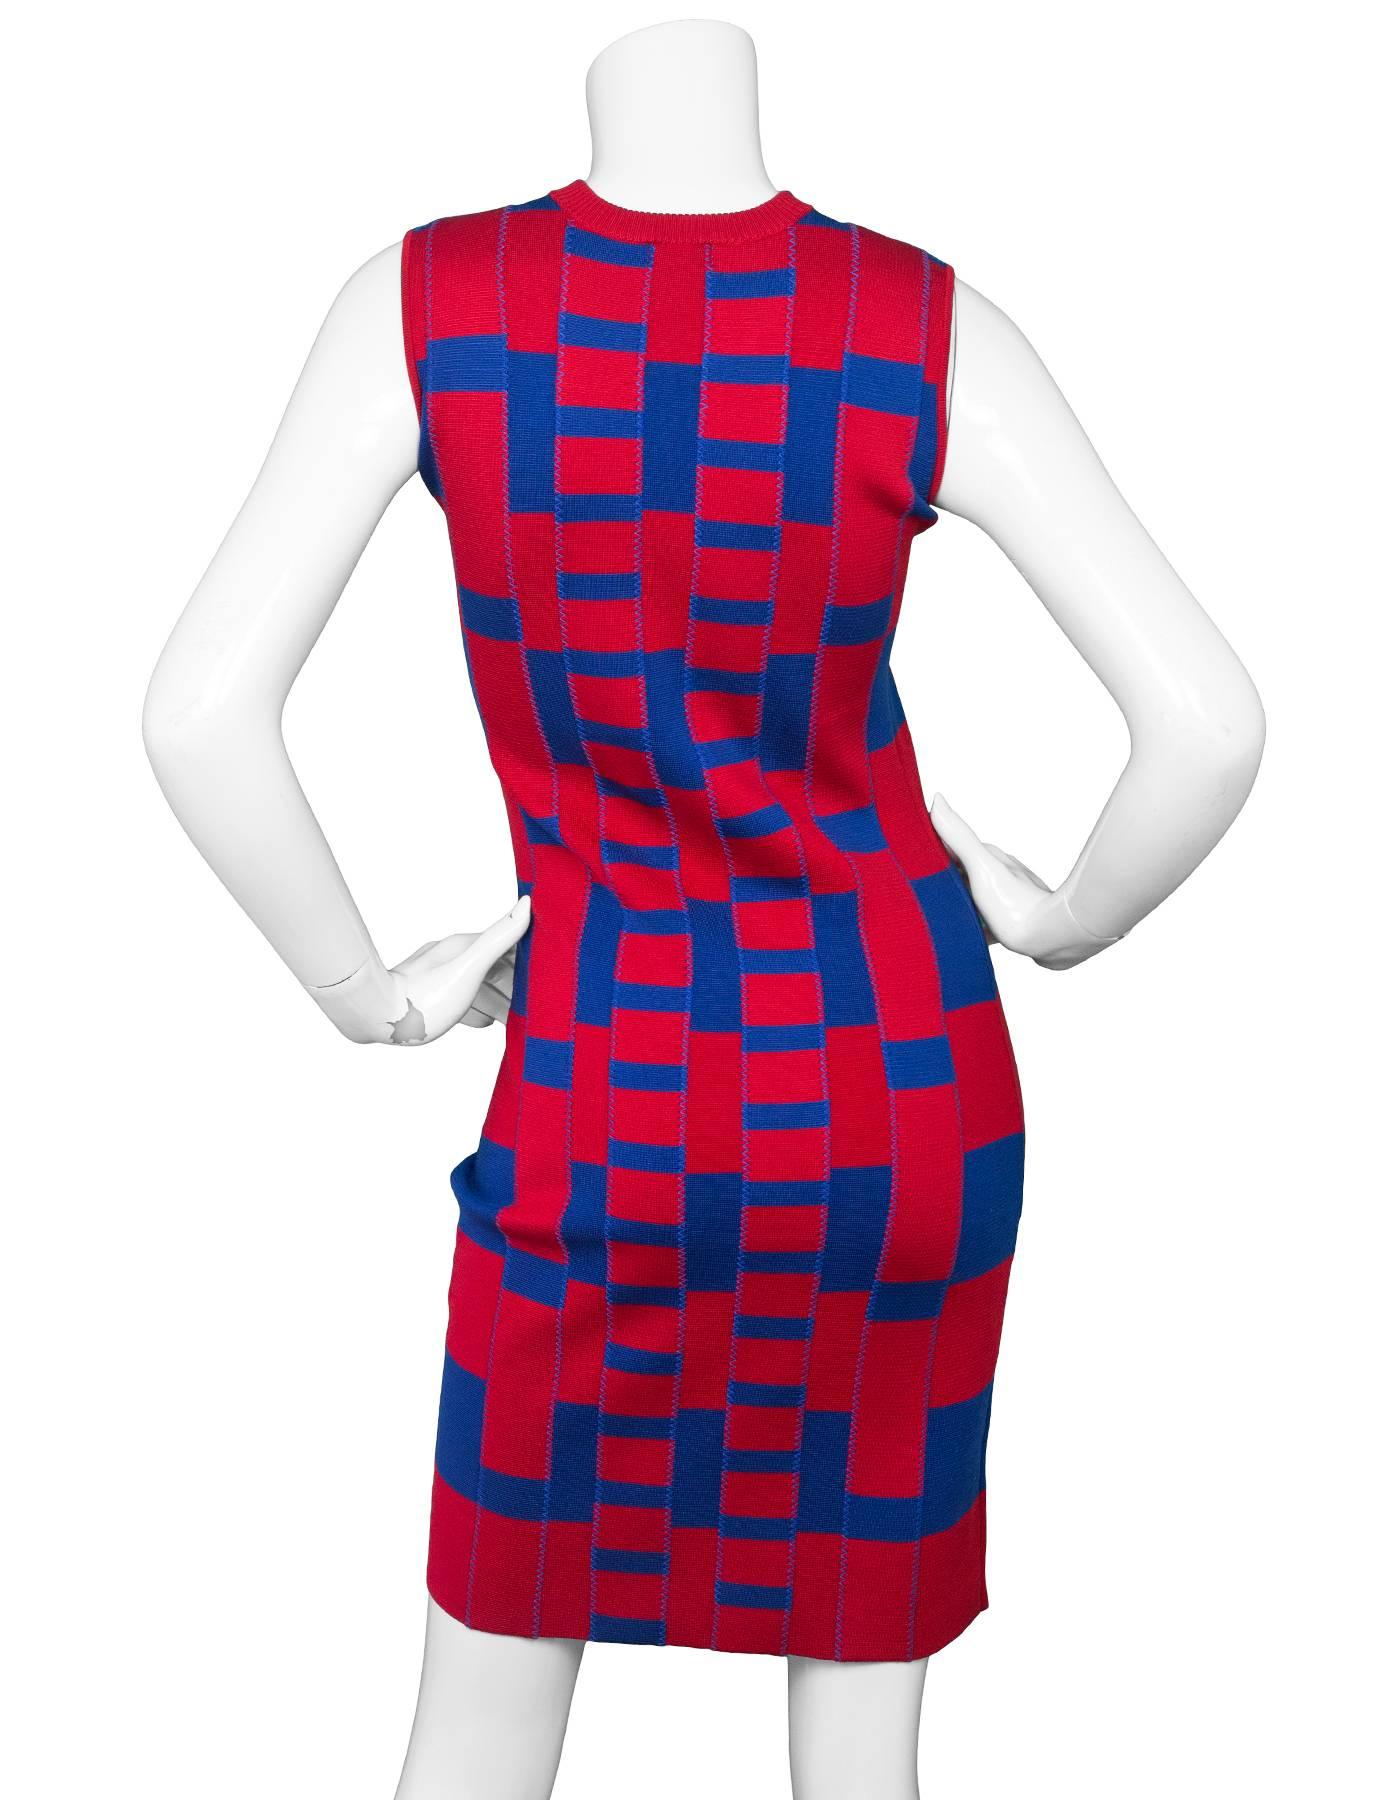 Kenzo Red & Blue Bandage Dress 
Features green leather tassel zipper pulls at each shoulder

Made In: China
Color: Red and blue
Composition: 75% silk, 25% elastane
Lining: None
Closure/Opening: Zippers at top shoulders and pull over style